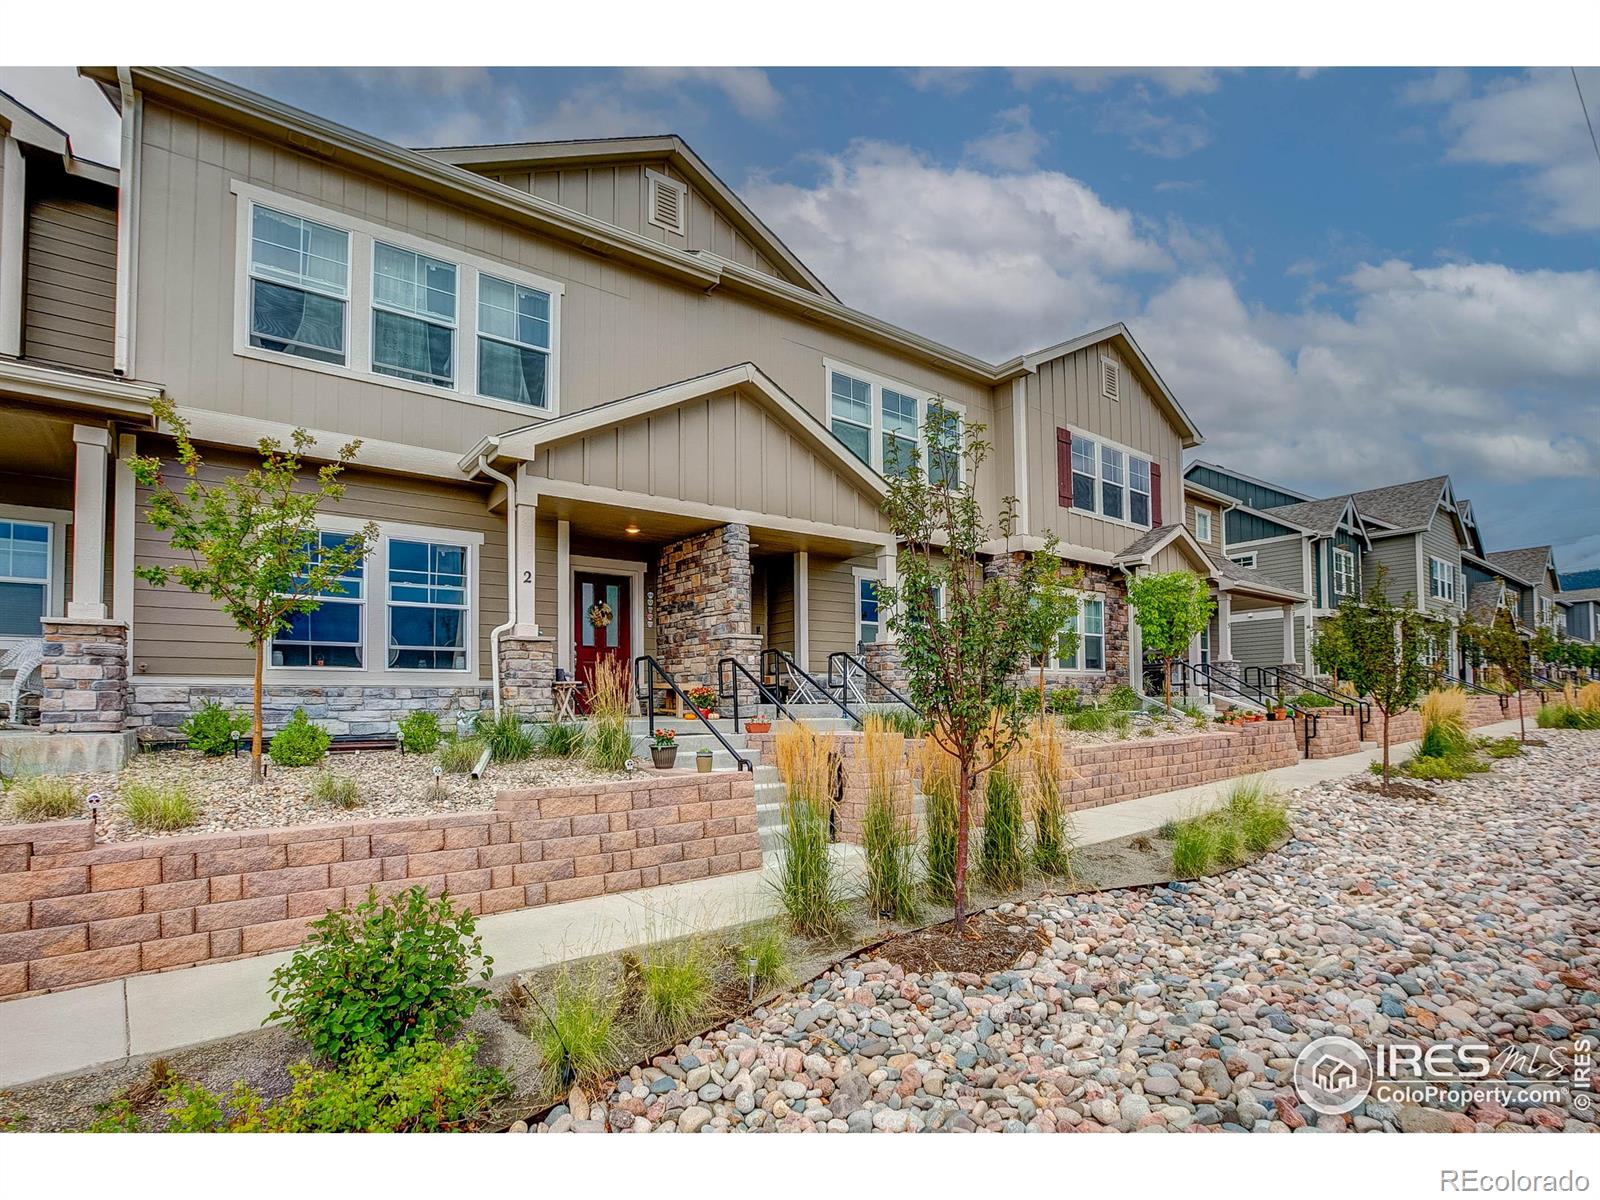 3009  Knolls End Drive, fort collins MLS: 123456789996412 Beds: 3 Baths: 3 Price: $475,000